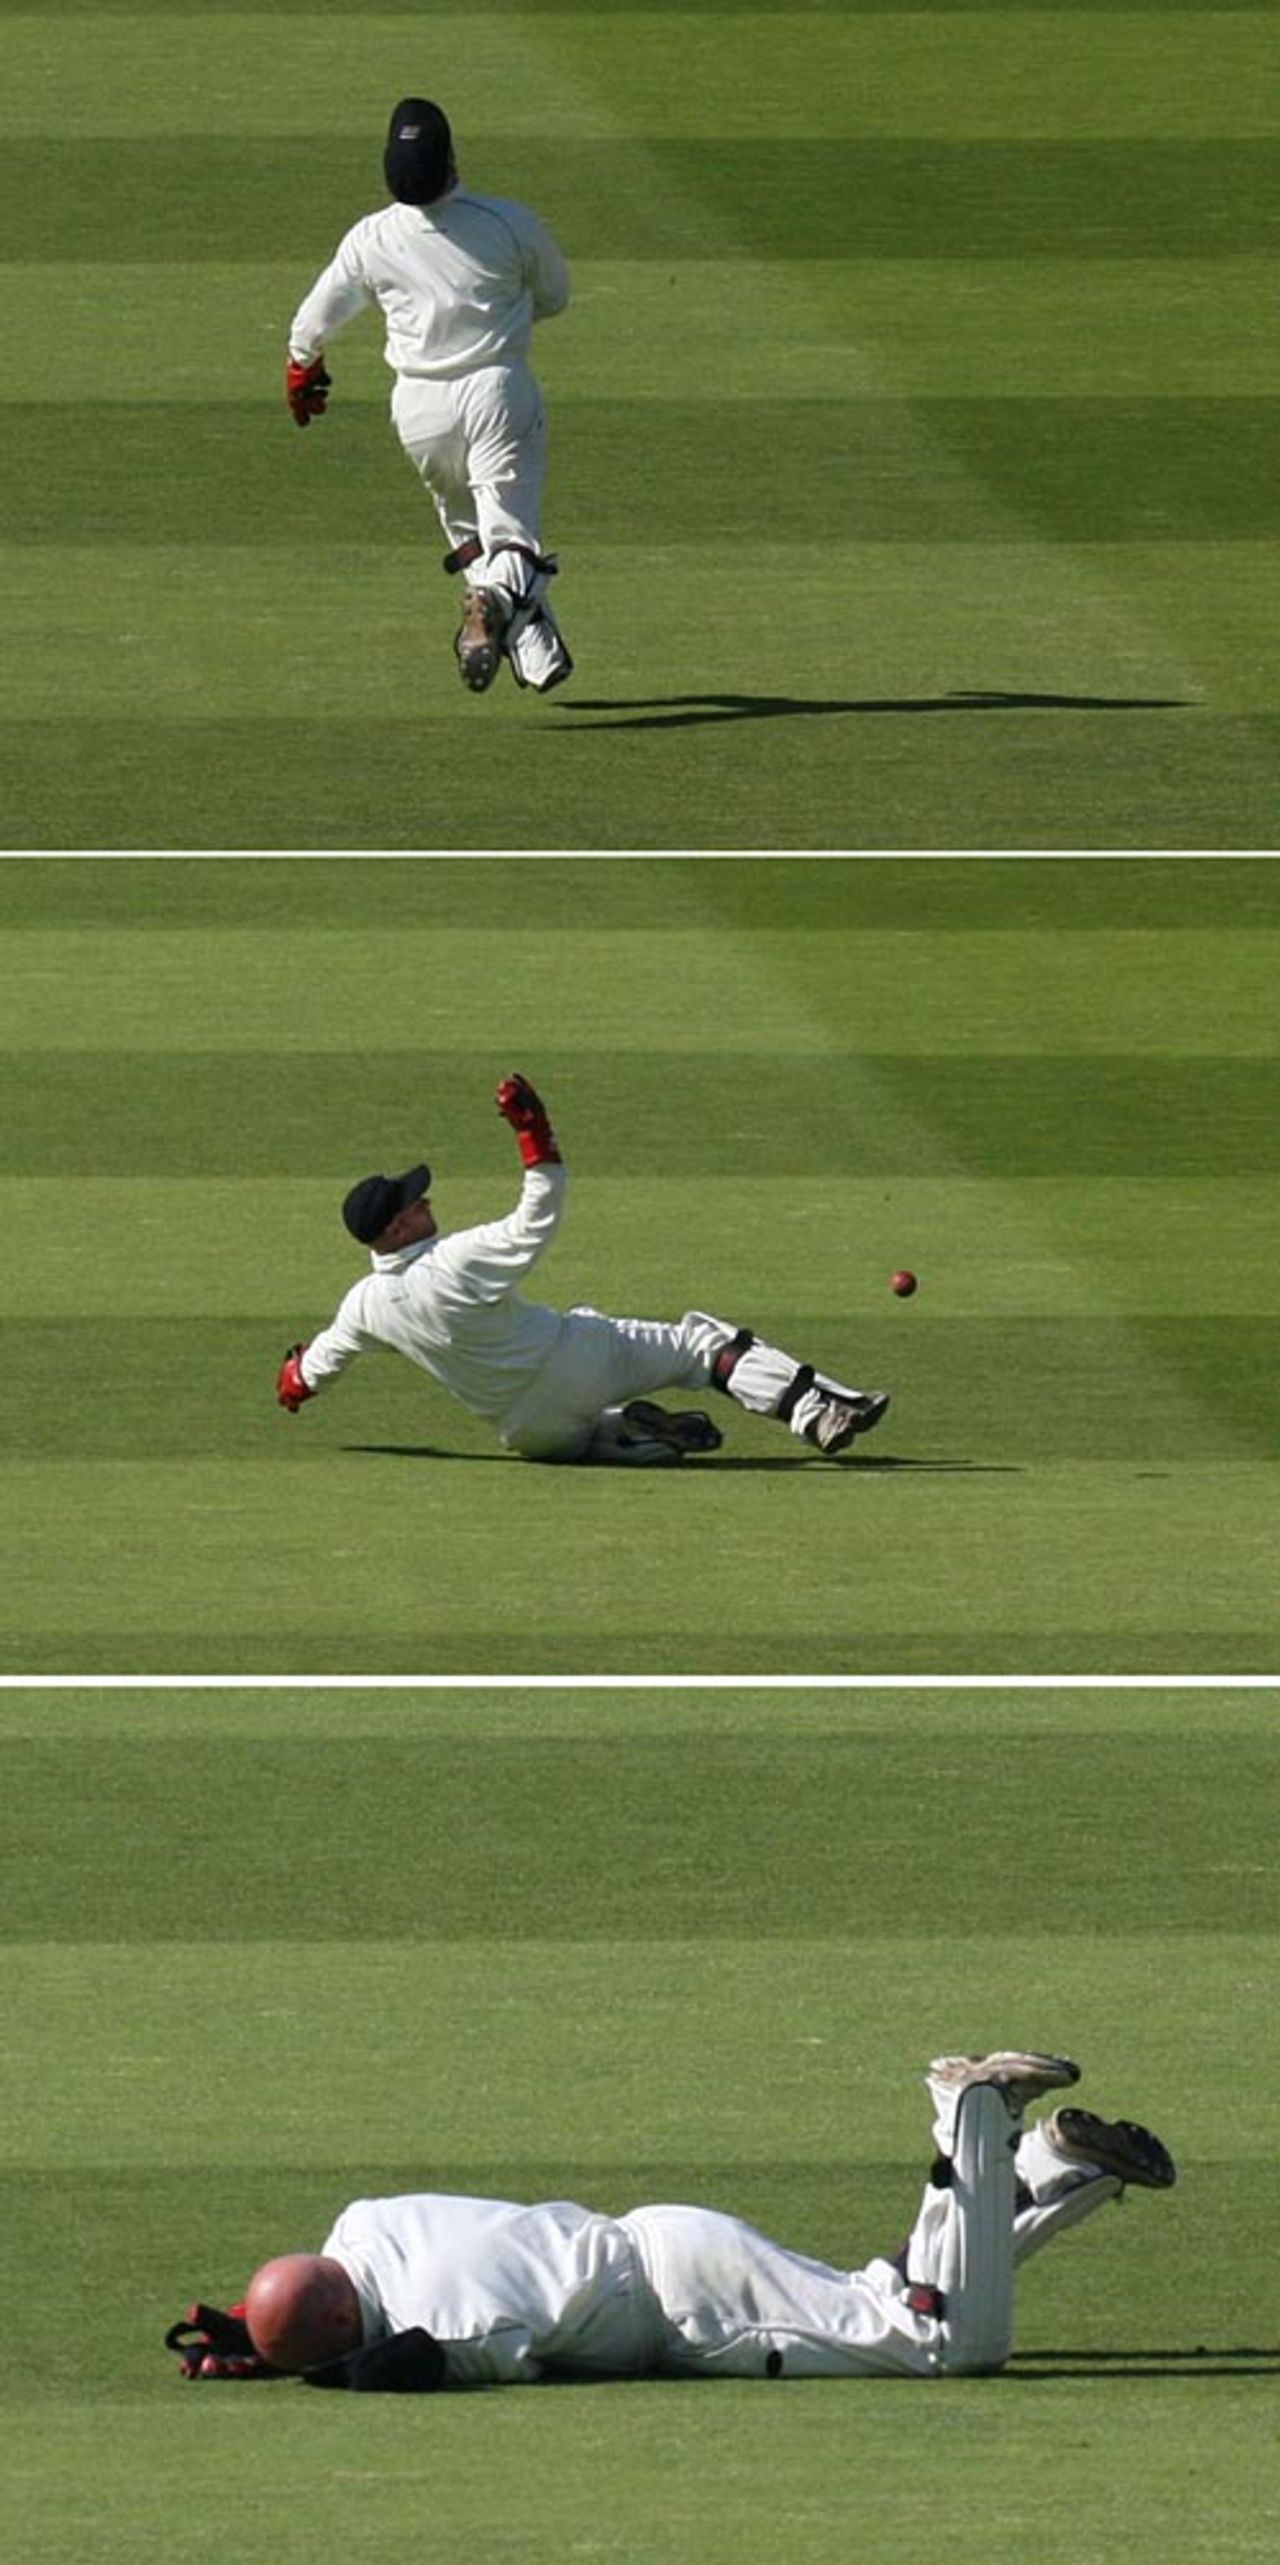 David Nash gets under - but fails to hold - a skyer from Paul Franks, Middlesex v Nottinghamshire, Lord's, September 8, 2006